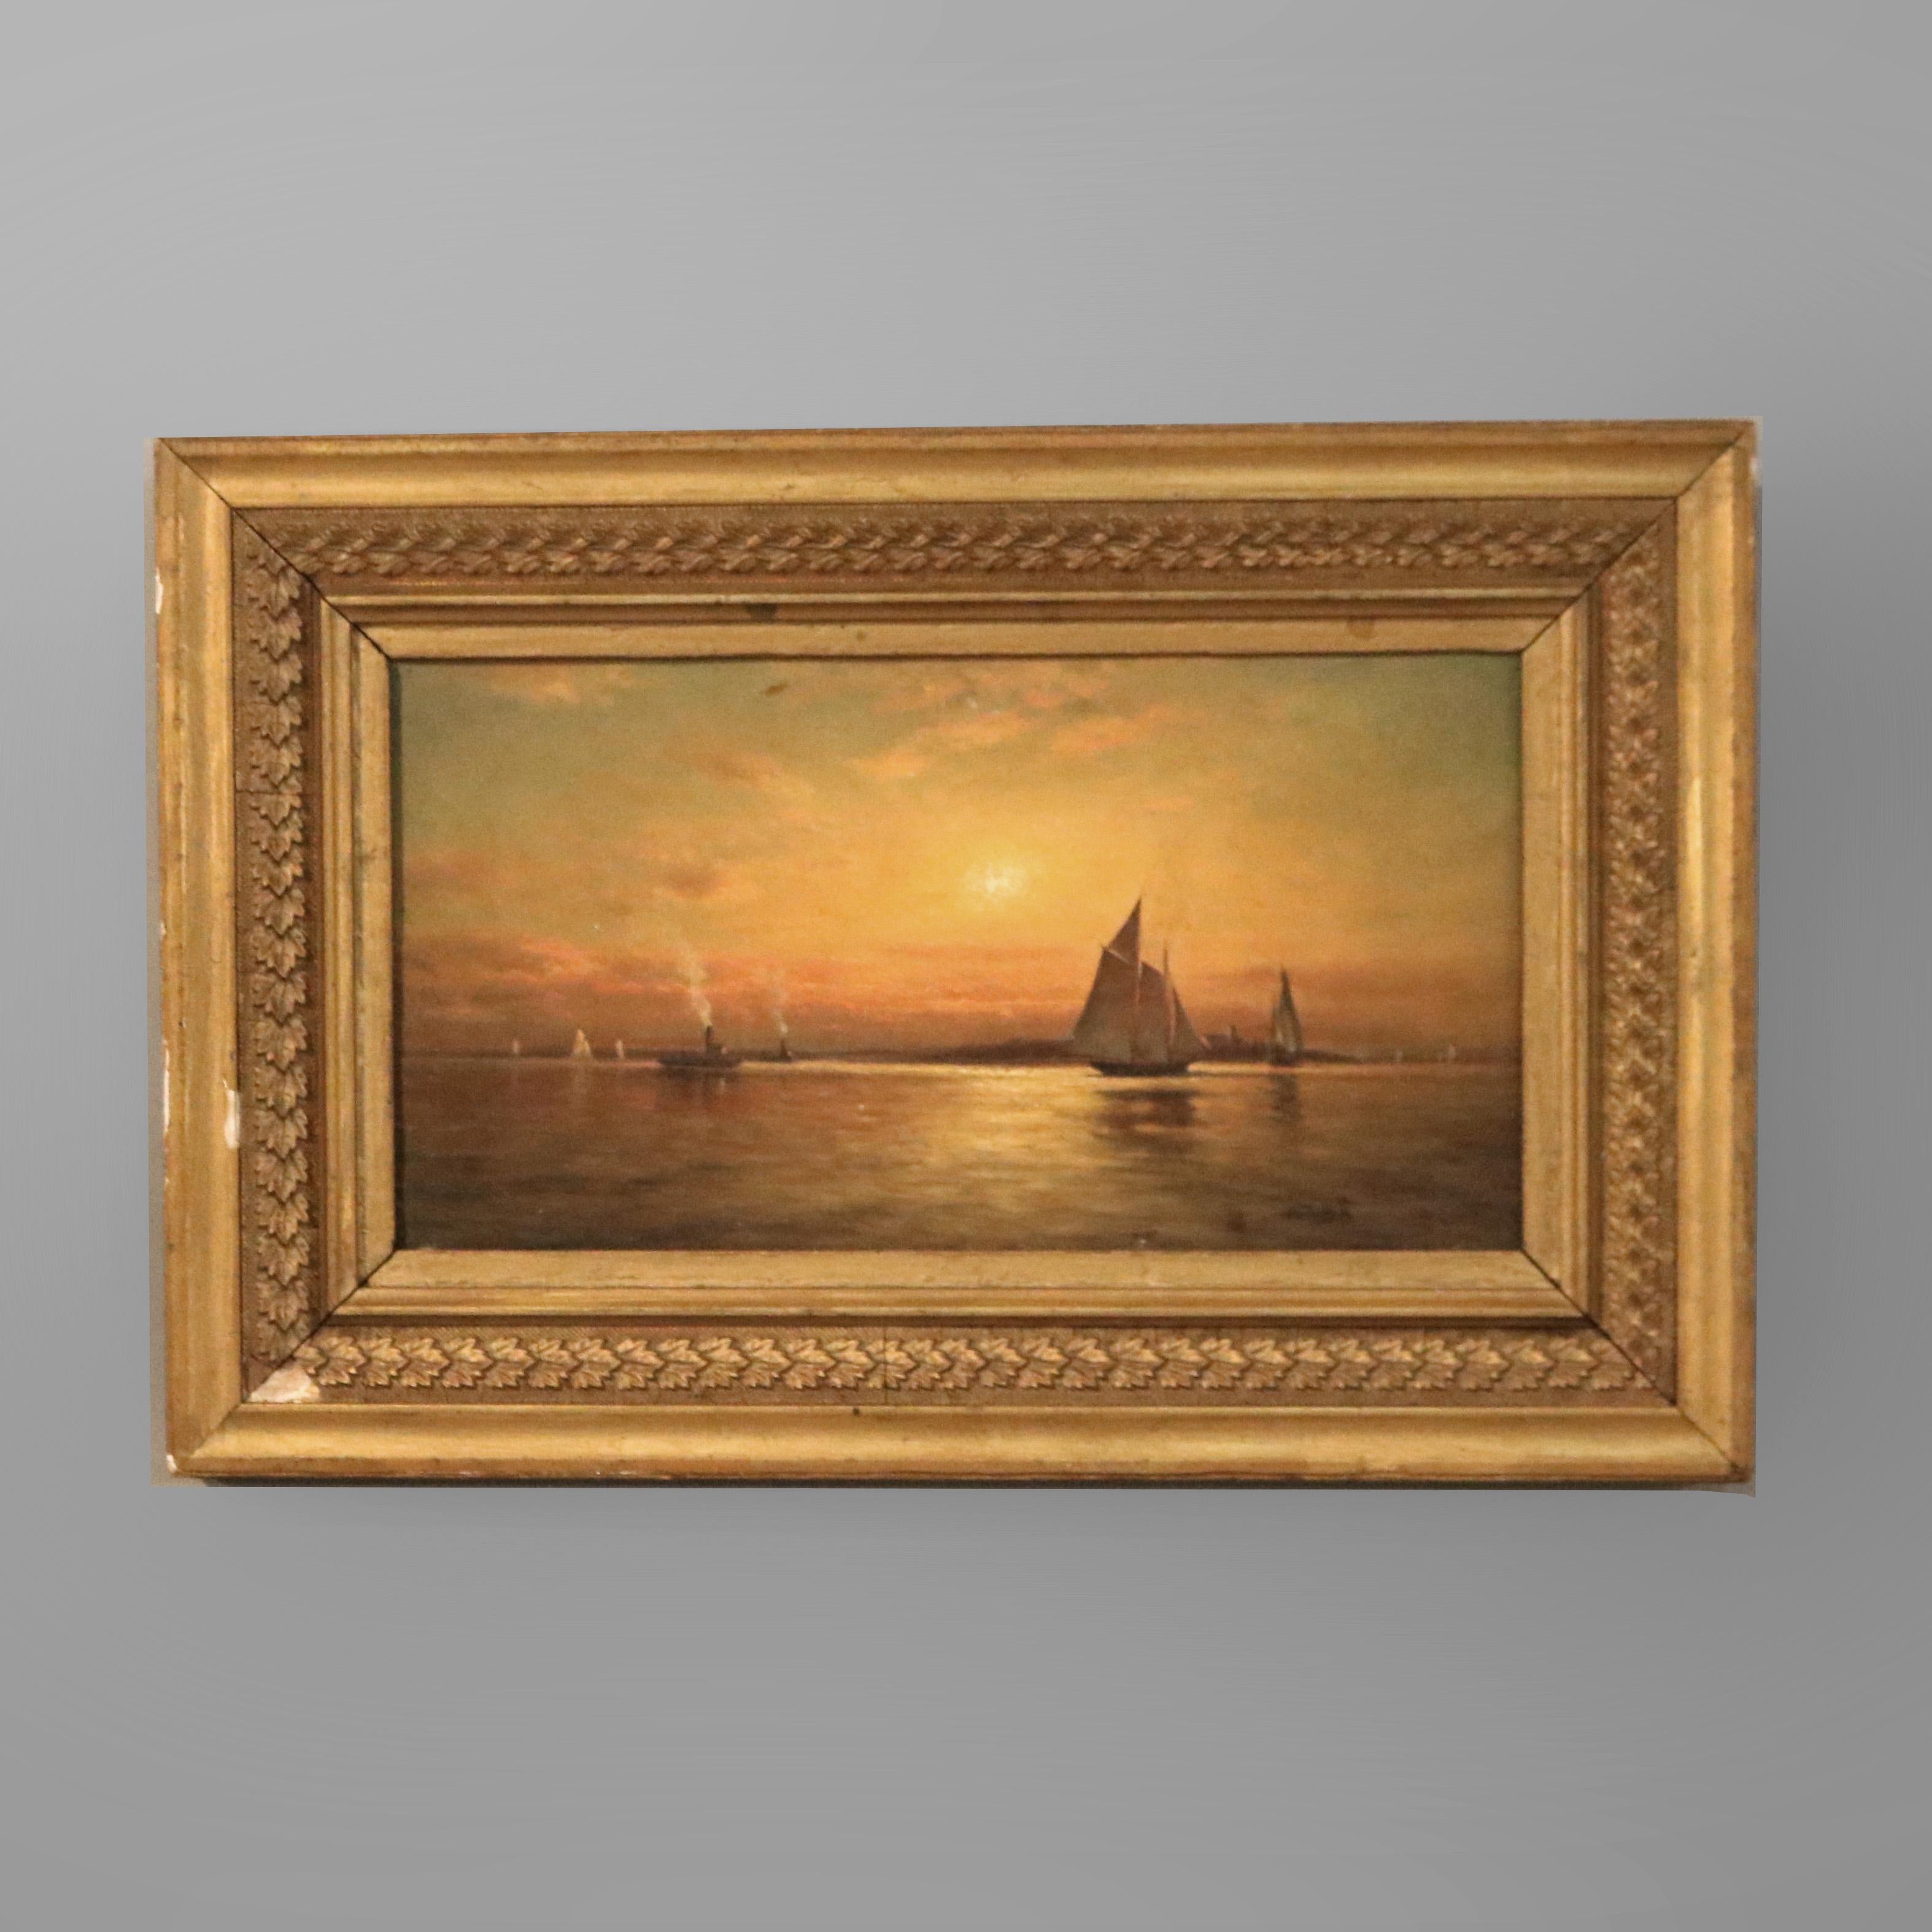 An antique nautical painting offers oil on canvas seascape at sunset with sail boats and steam ships, unsigned, c1880

Measures - overall 11.75''h x 17.75''w x 1.5''d; sight 7.25'' x 13.25''.